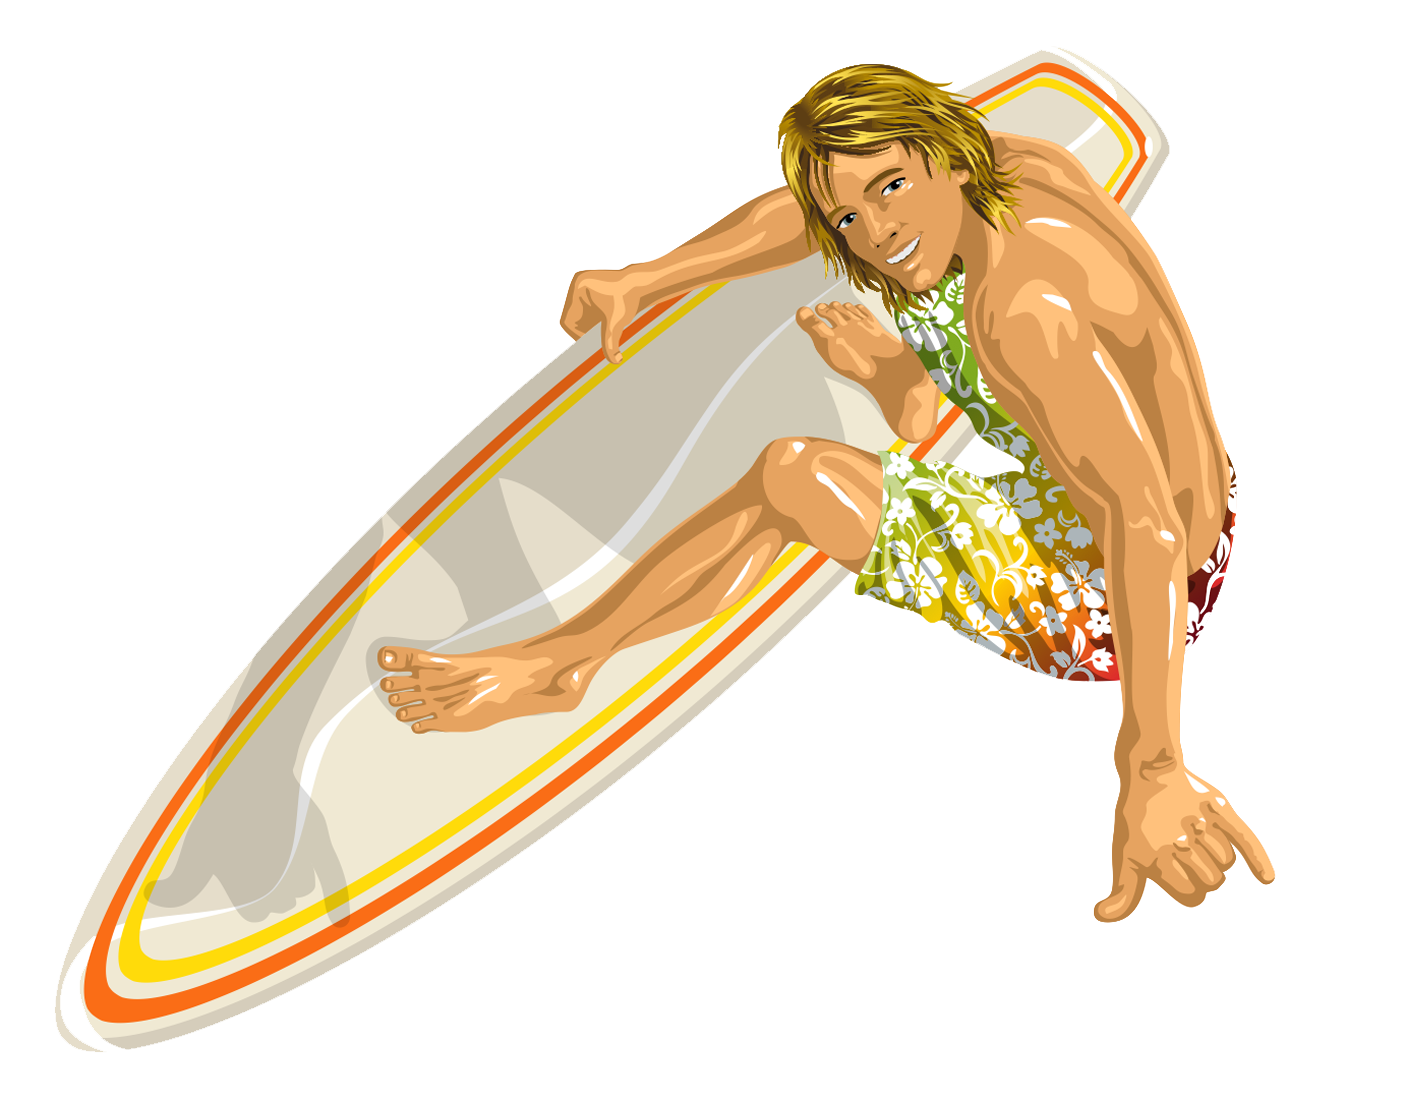 Surfing Png Picture - Surfing, Transparent background PNG HD thumbnail